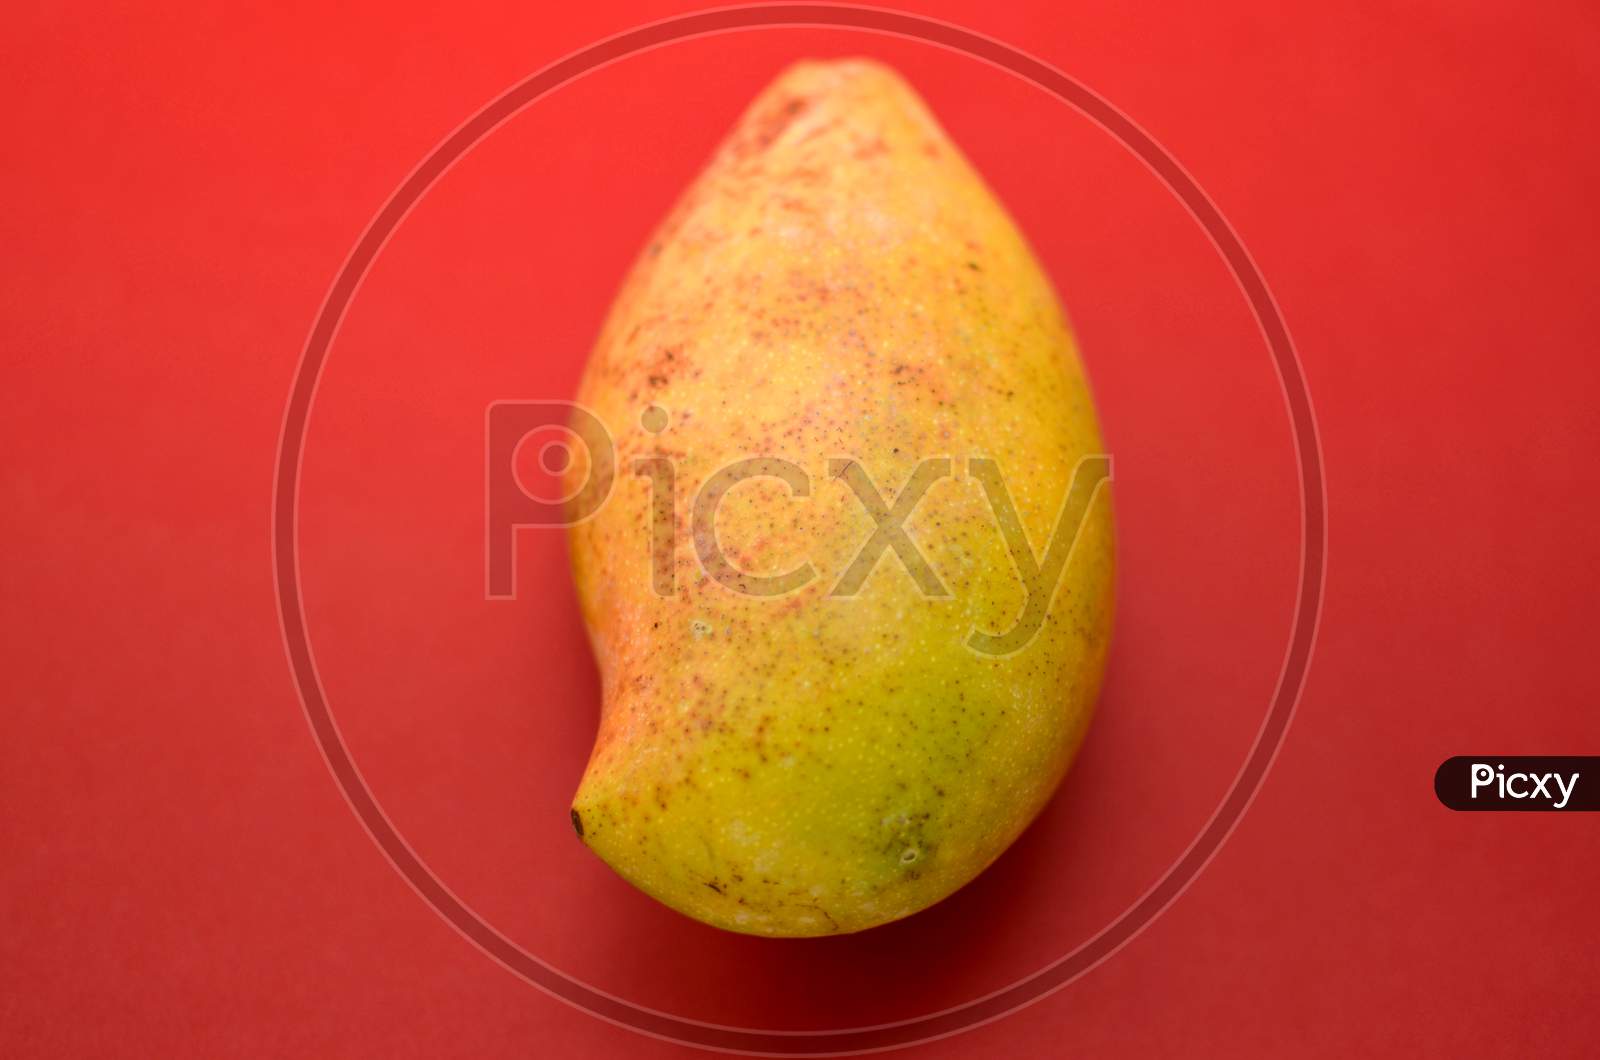 A Yellow Indian Mango On Red Background